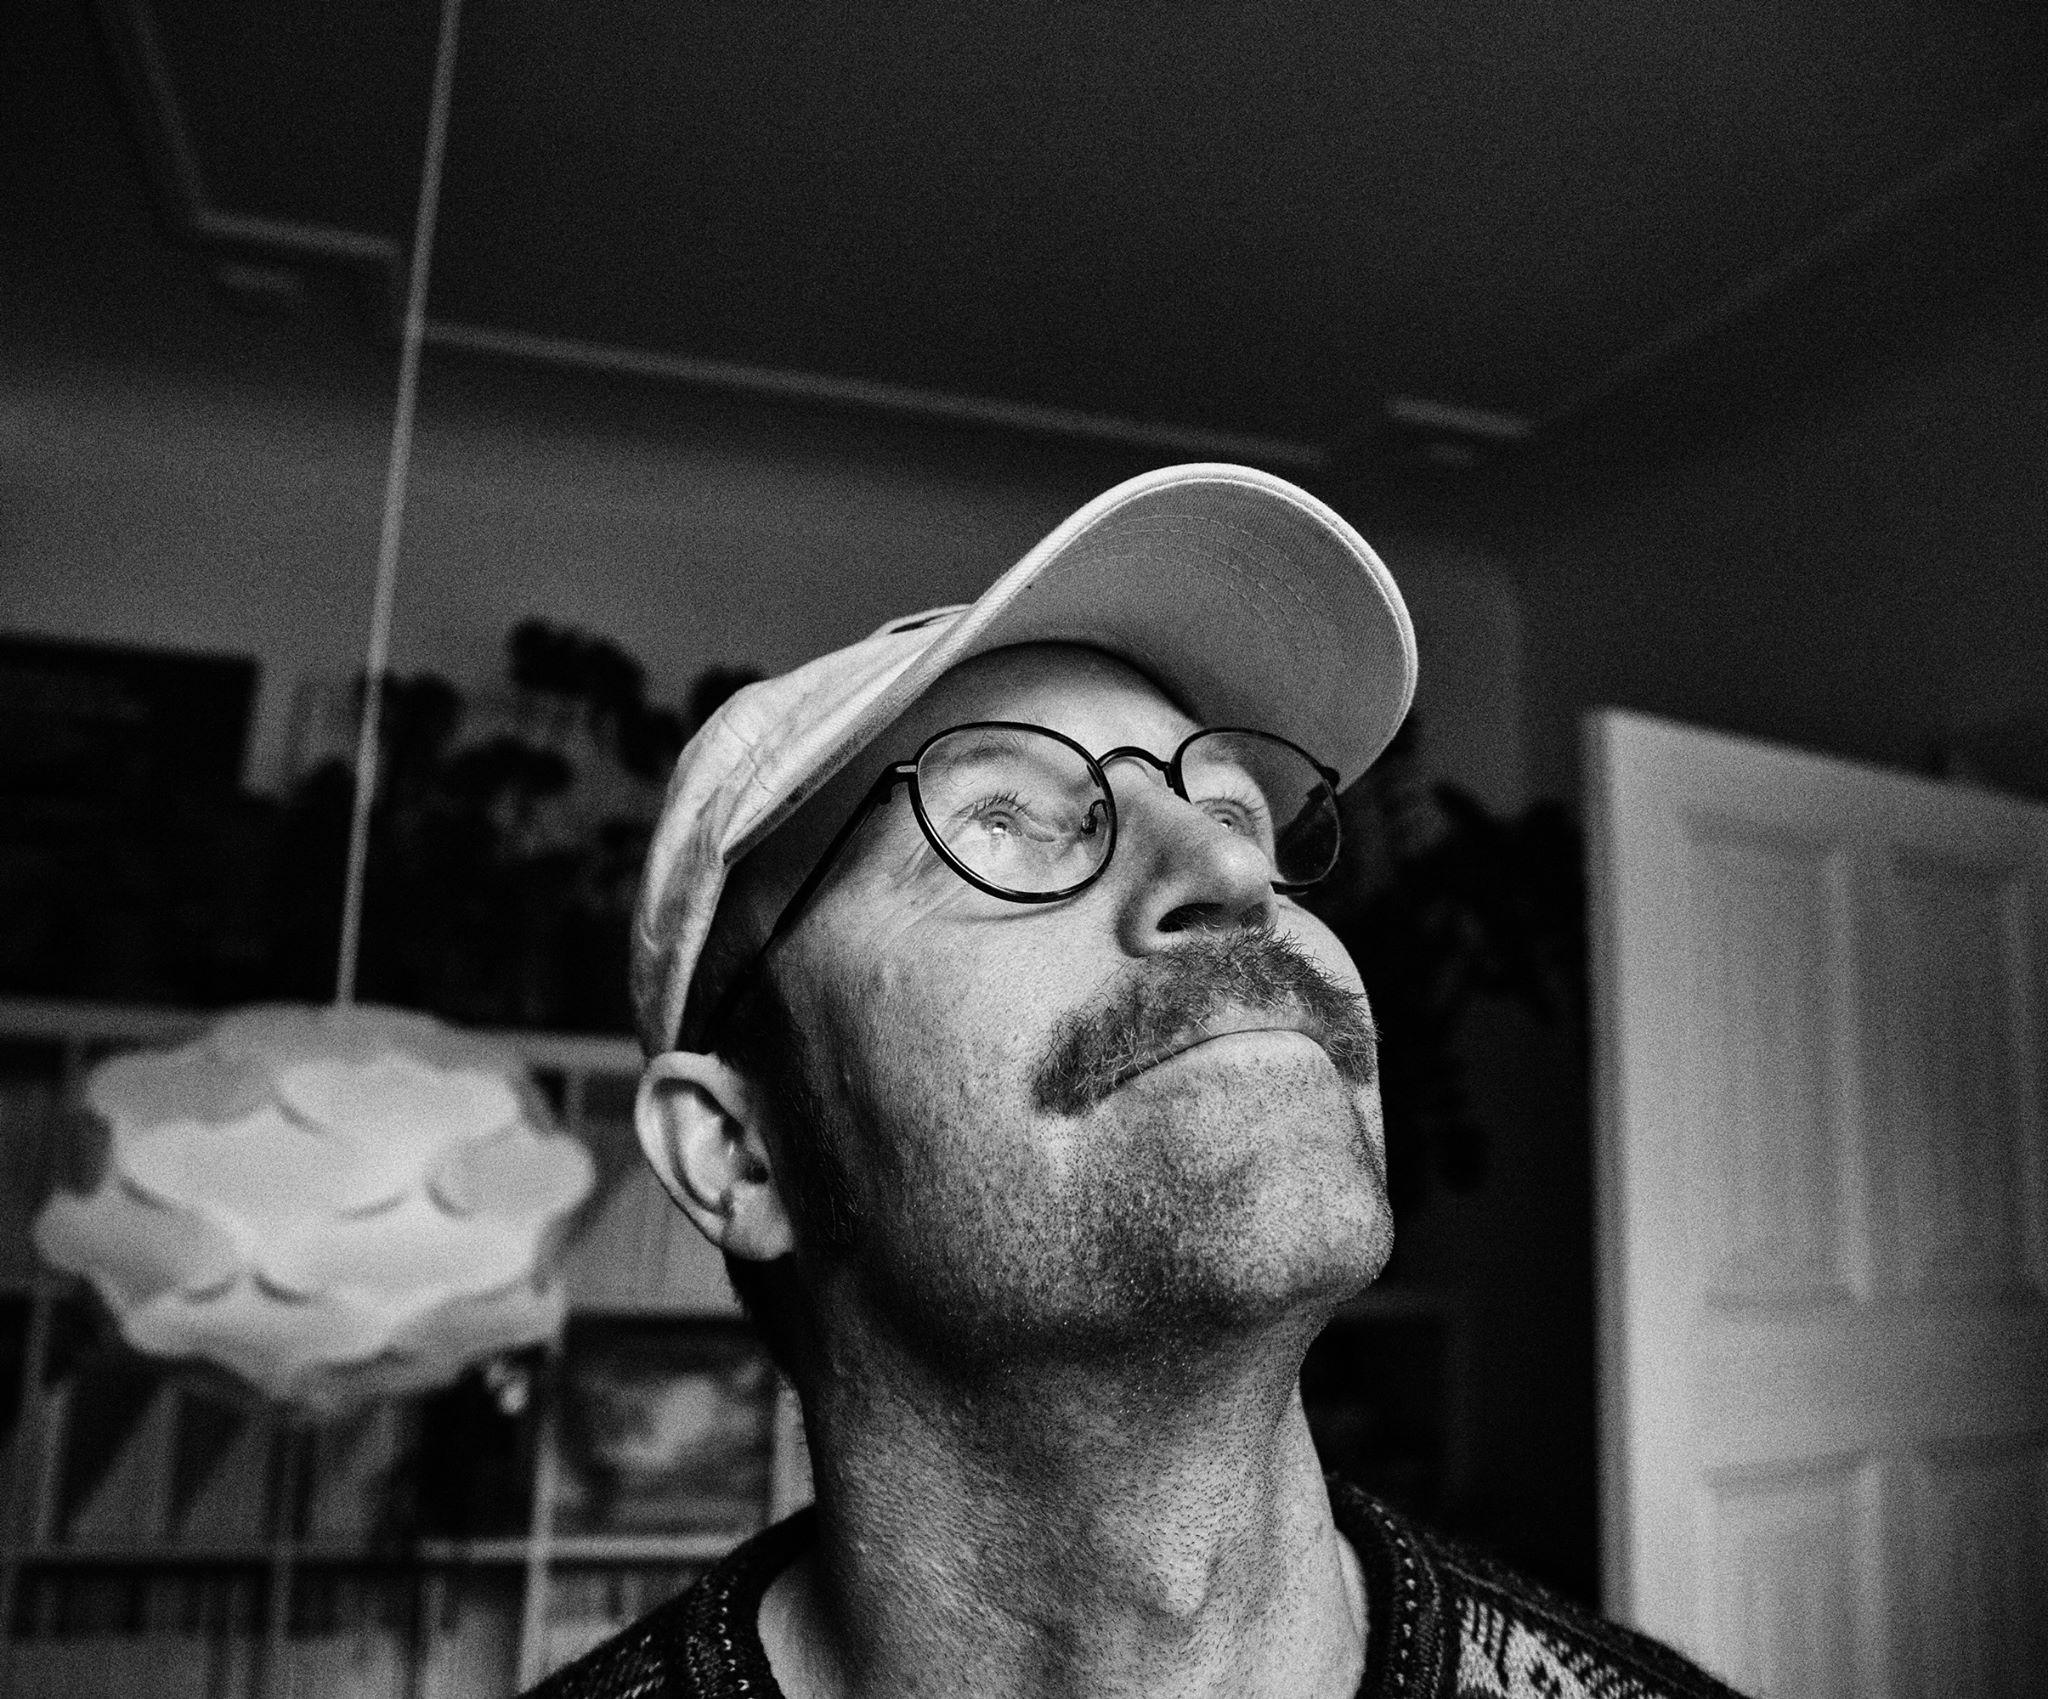 Leif Magne Tangen, a white-skinned person with short hair and moustache is looking up and smiling. The image is black and white and the backdrop of the image is displaying a room, a book shelf and an open door. Framed from the shoulders up, Leif is wearing a t-shirt, round glasses and a cap.